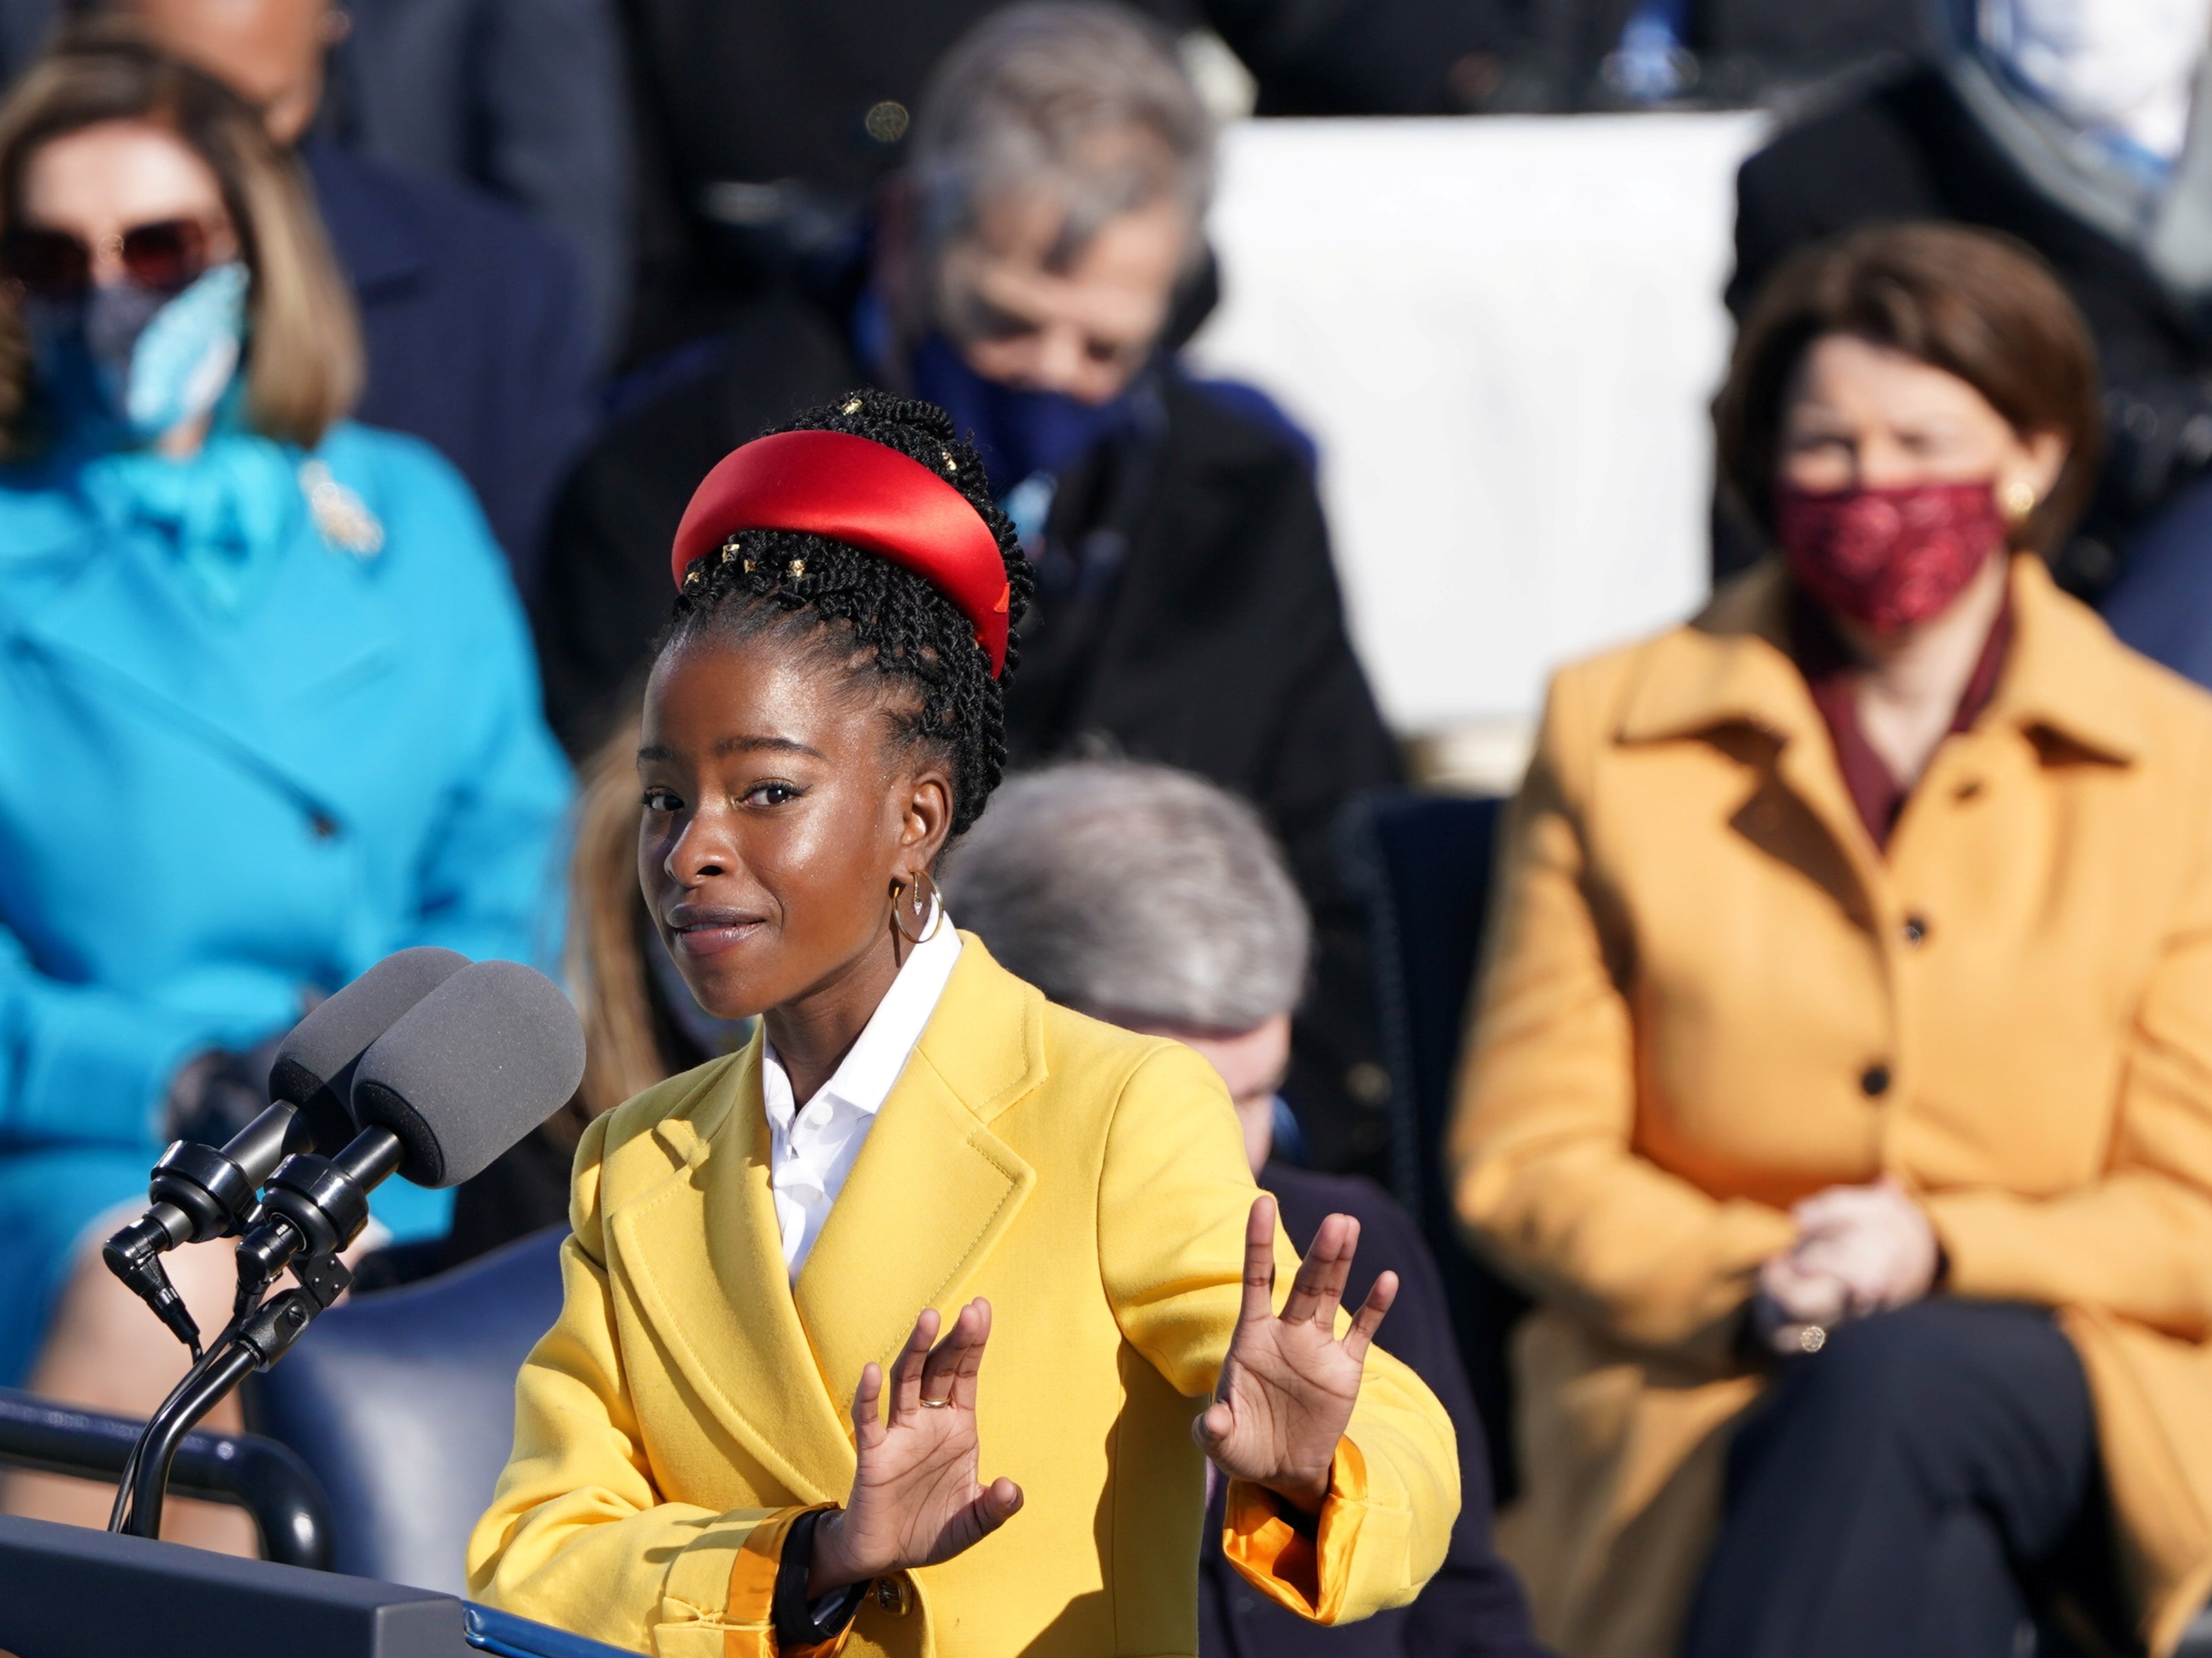 Amanda Gorman recites a poem during the inauguration of Joe Biden, referencing Biblical scripture and at times echoing the oratory of John F Kennedy and the Rev Martin Luther King Jr as she asked: ‘Where can we find light/In this never-ending shade?’